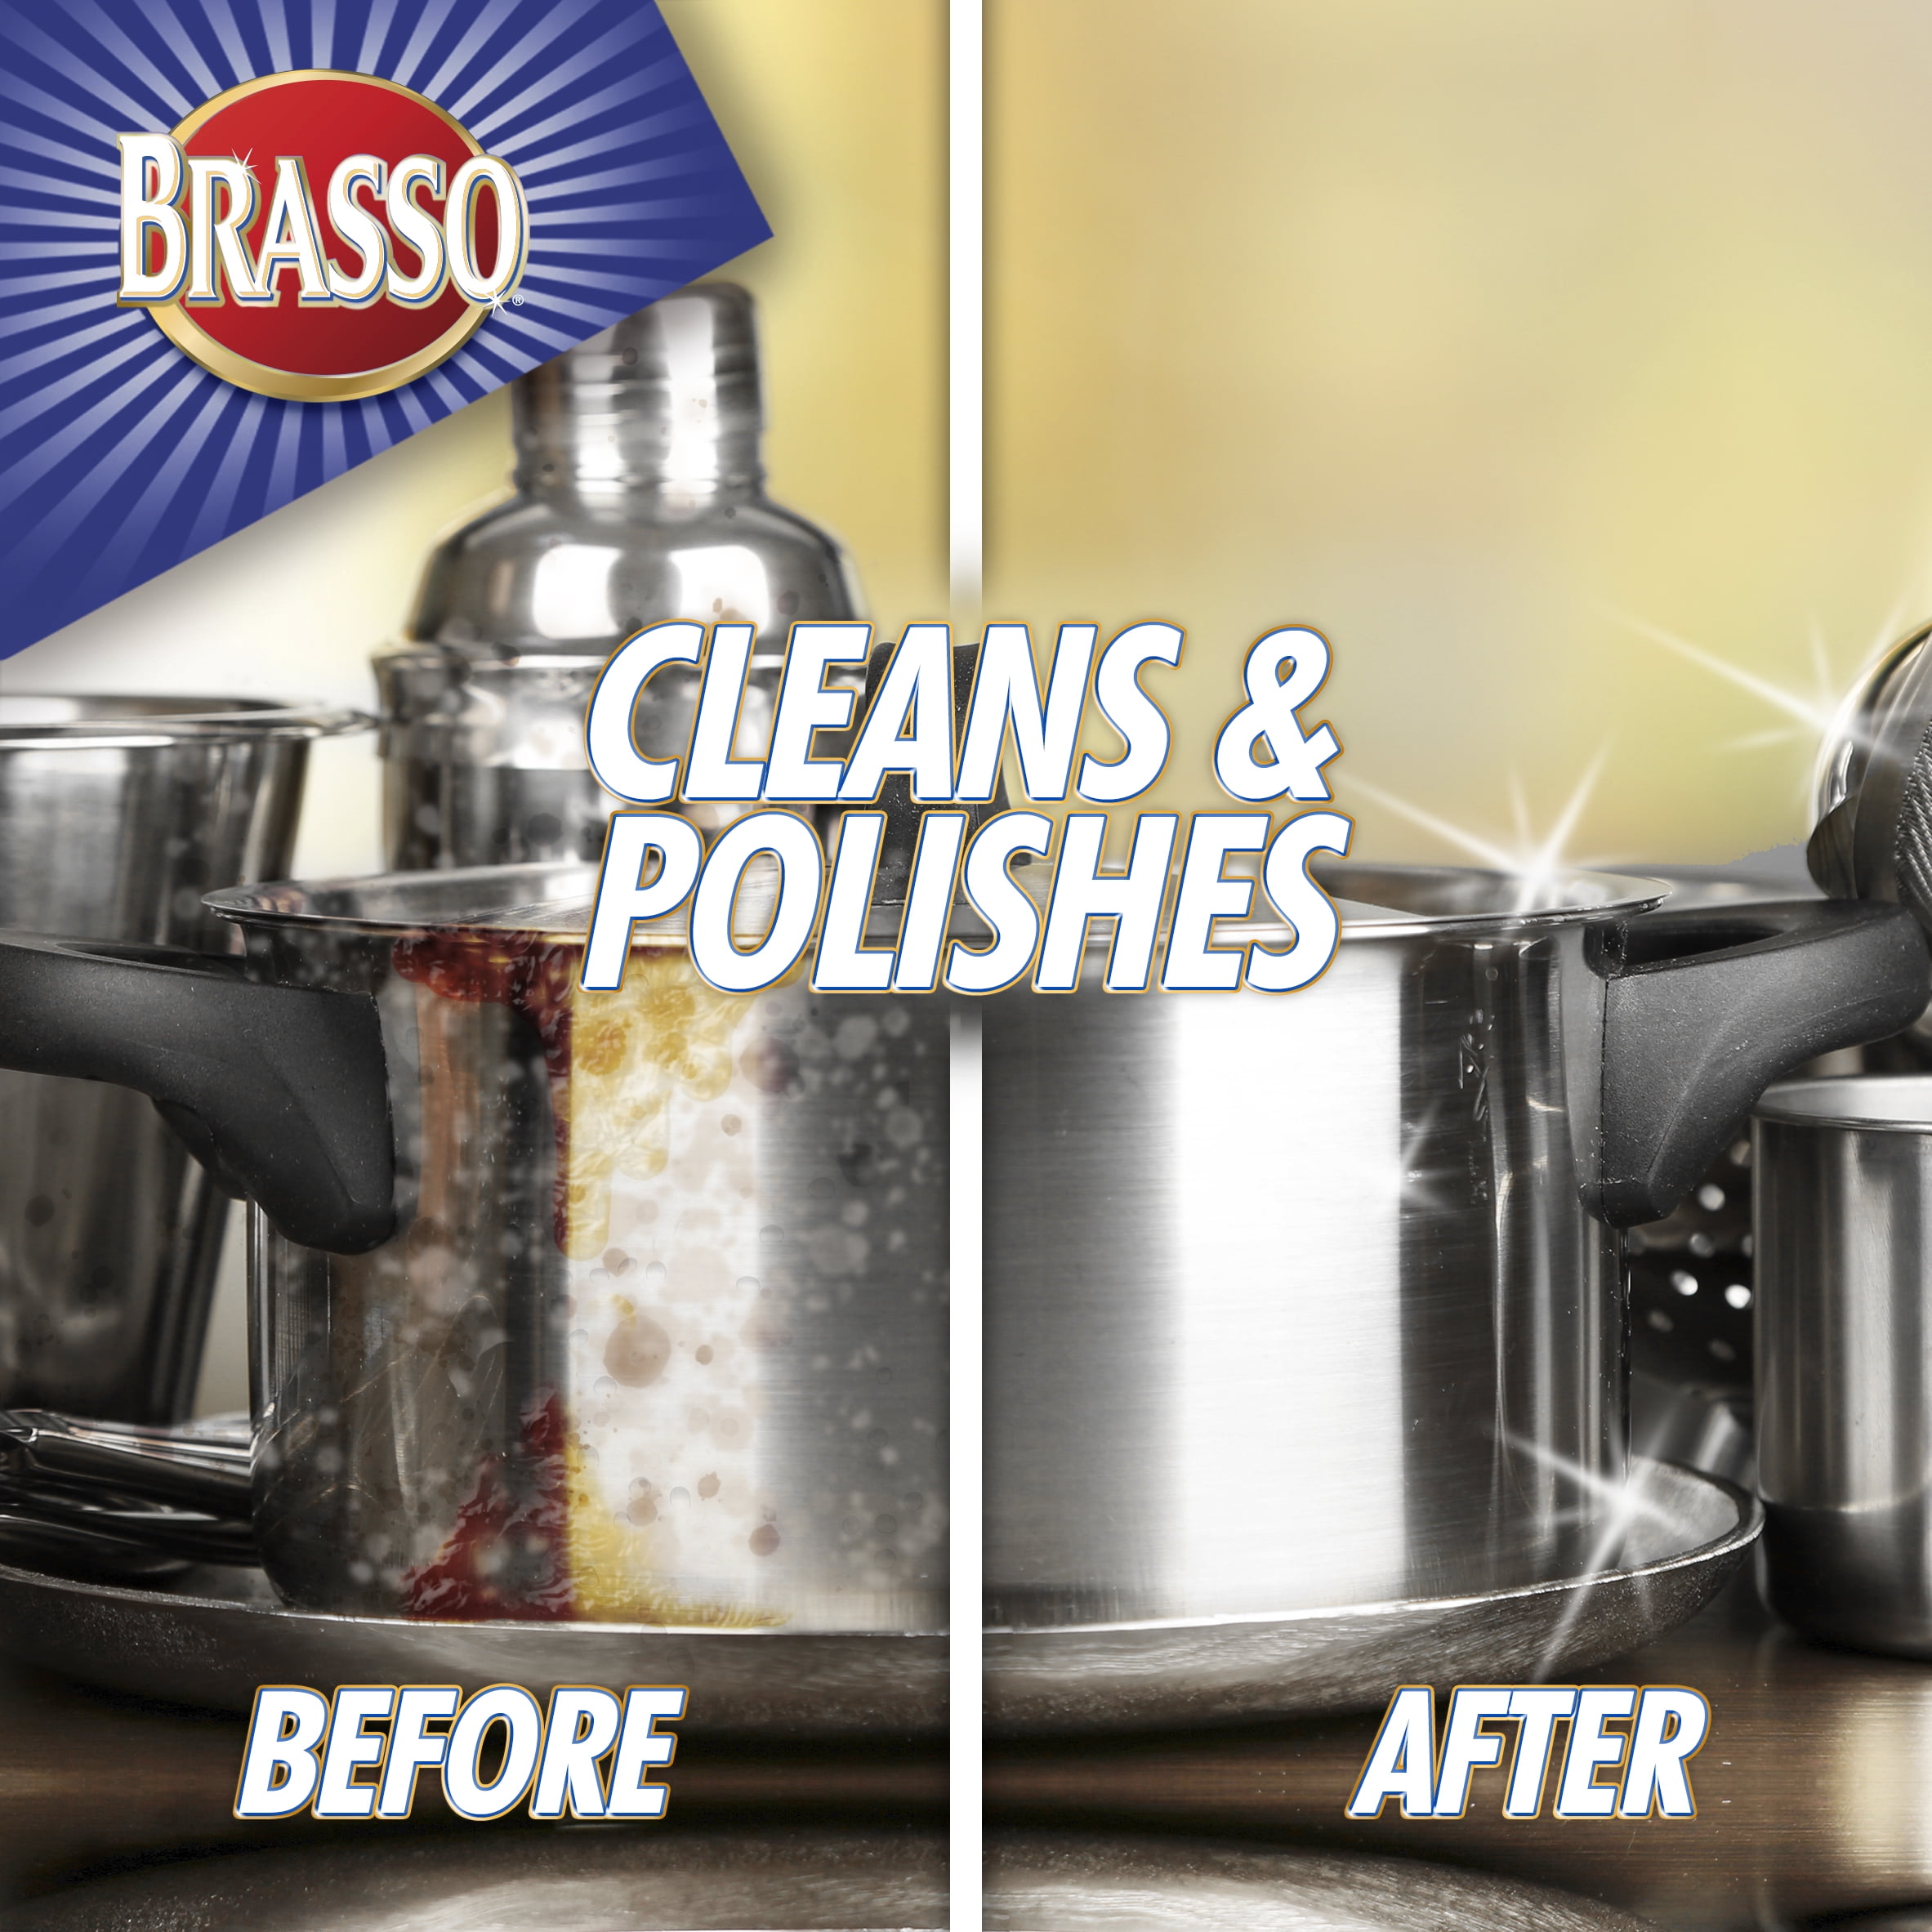 Brasso Metal Polish in Central Division - Household Chemicals, Isco Shafiq